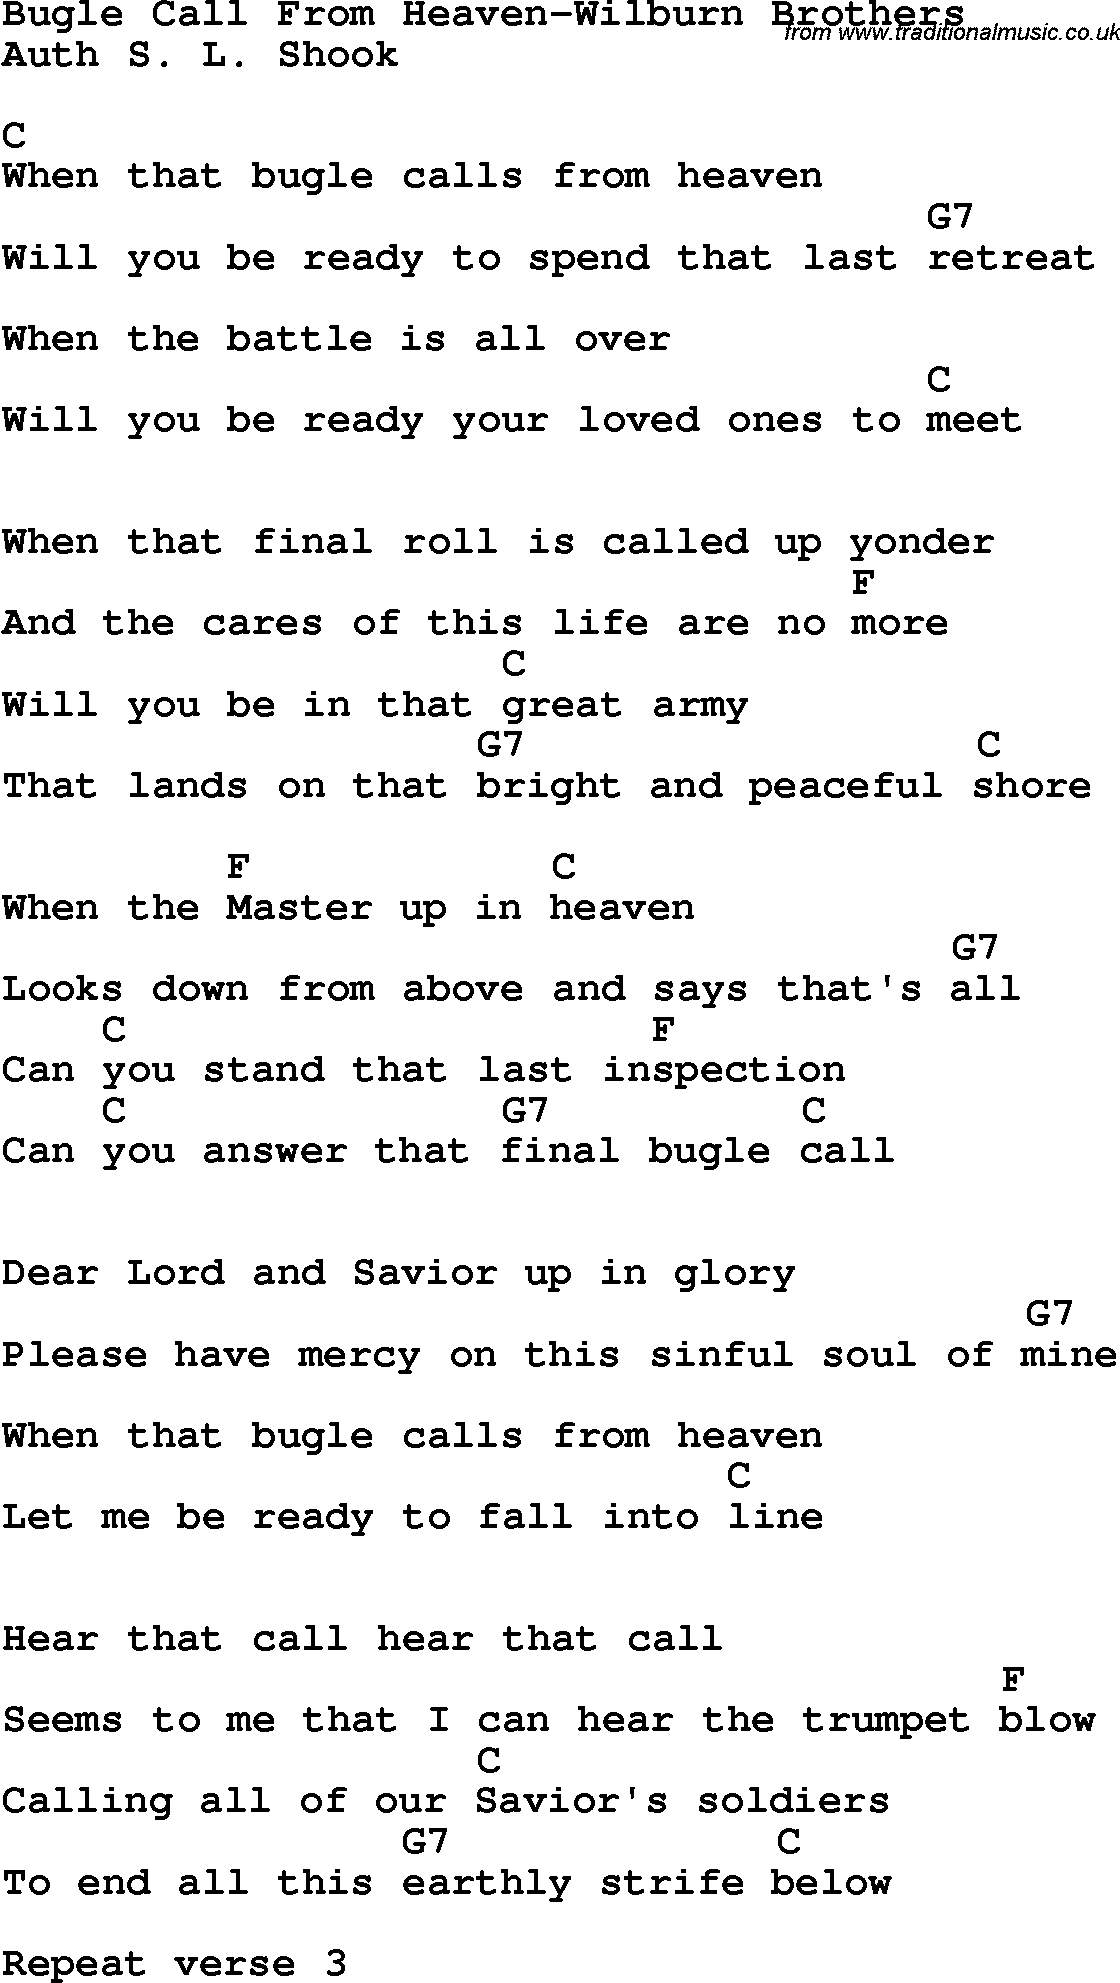 Country, Southern and Bluegrass Gospel Song Bugle Call From Heaven-Wilburn Brothers lyrics and chords